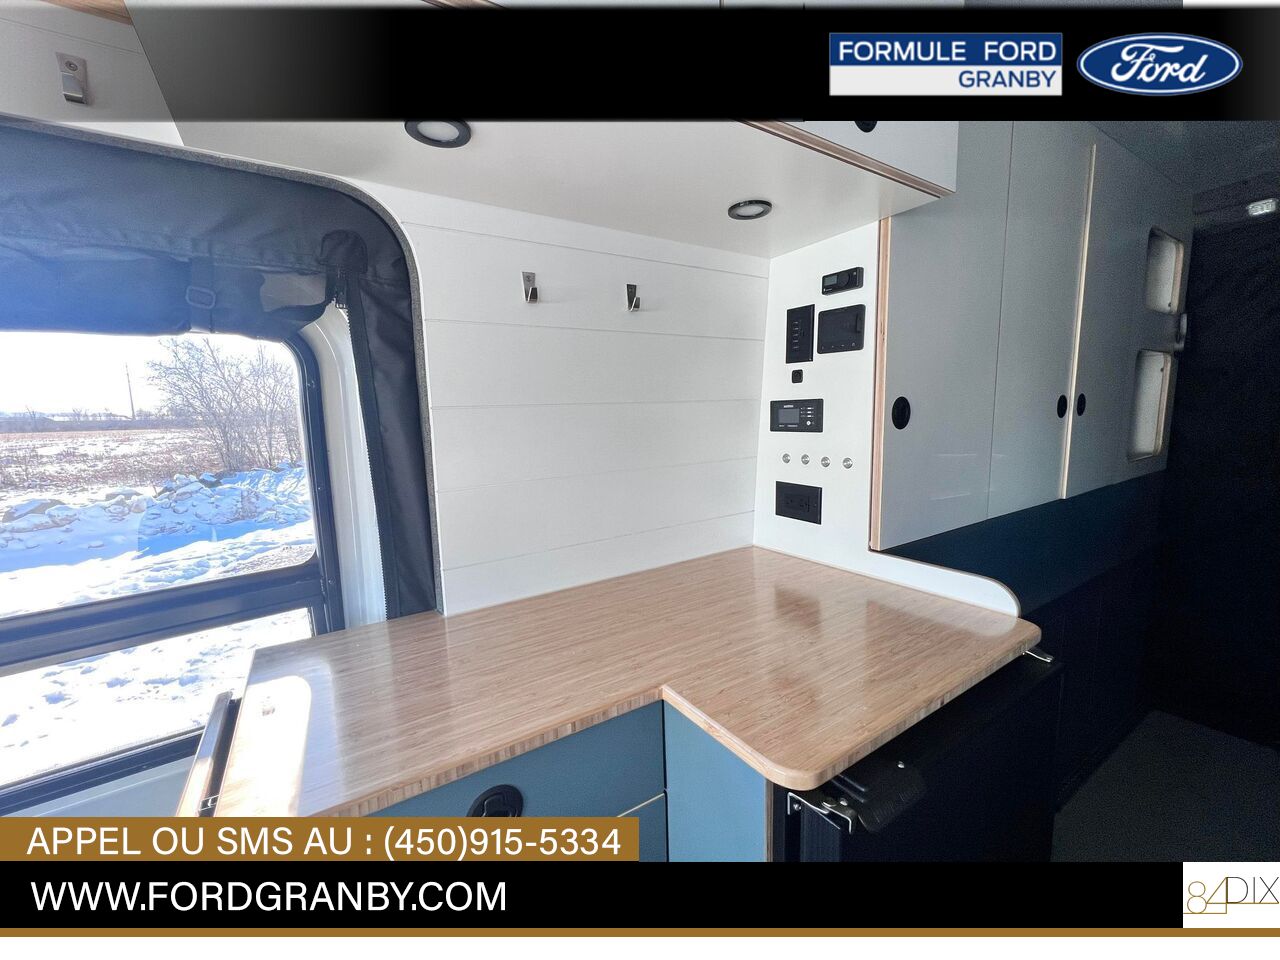 Ford Transit fourgon utilitaire 2019 Granby - photo #34